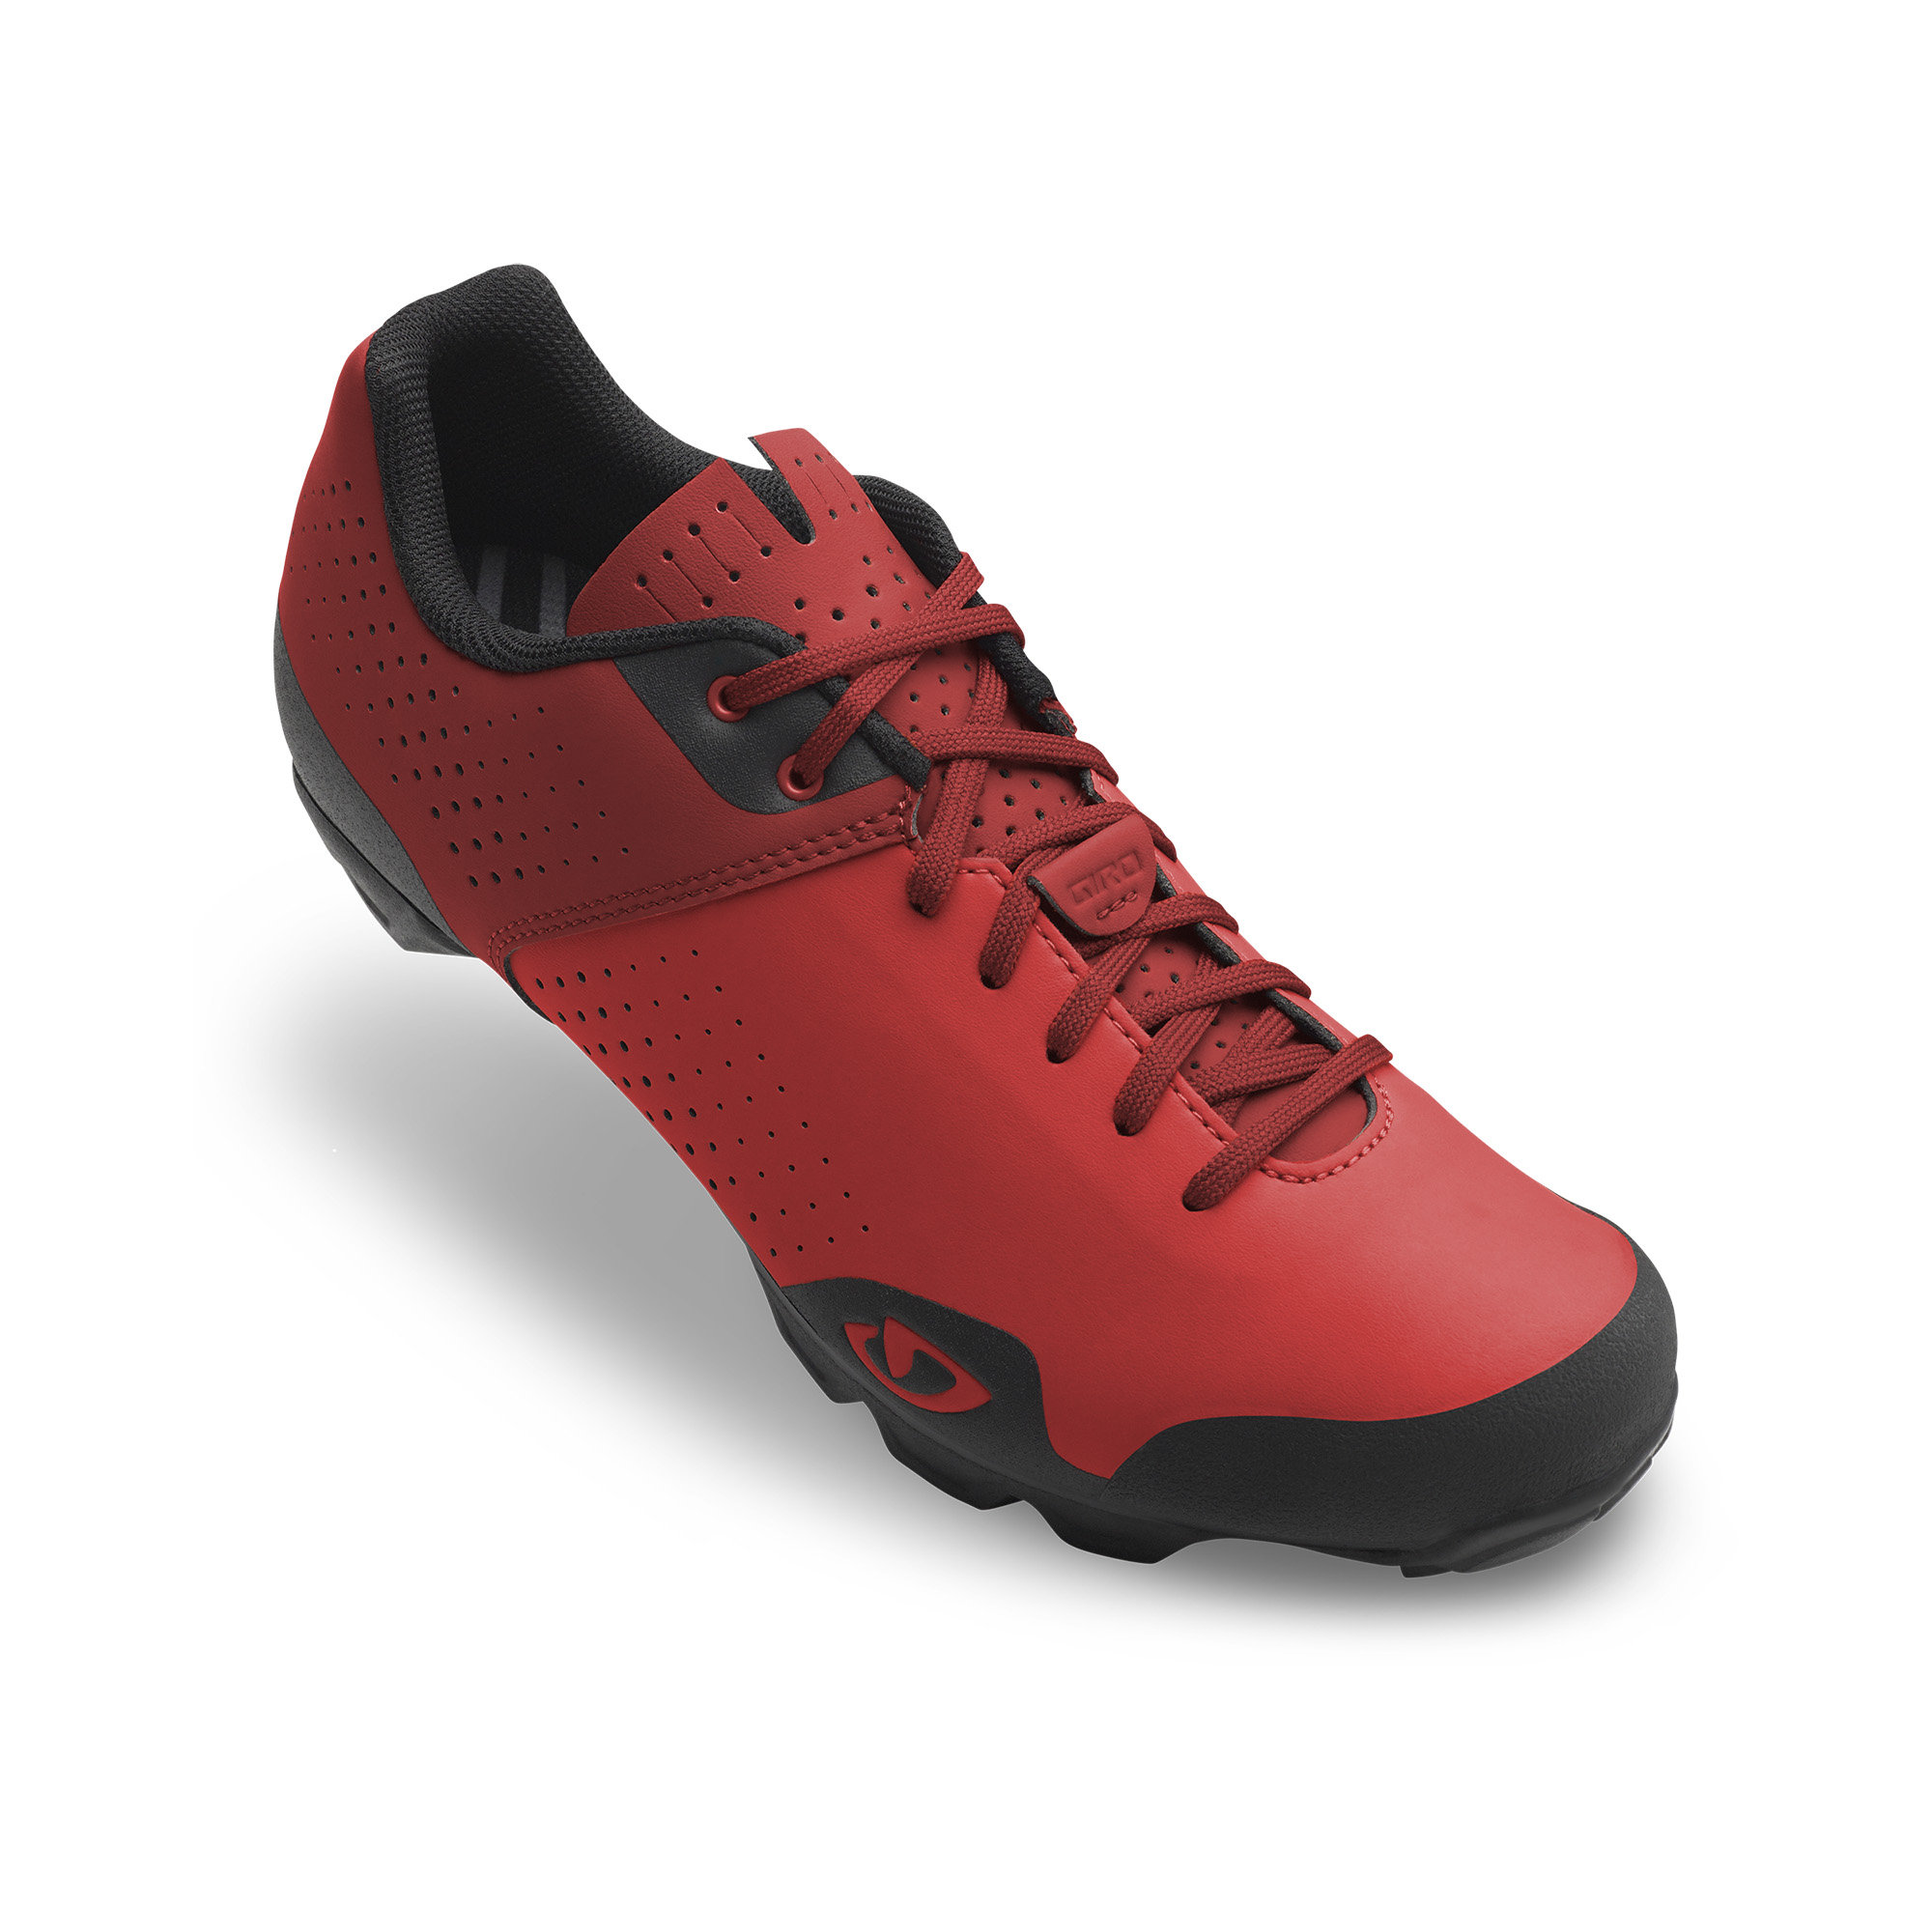 Giro Privateer Lace Shoe - www.cyclesmith.ca